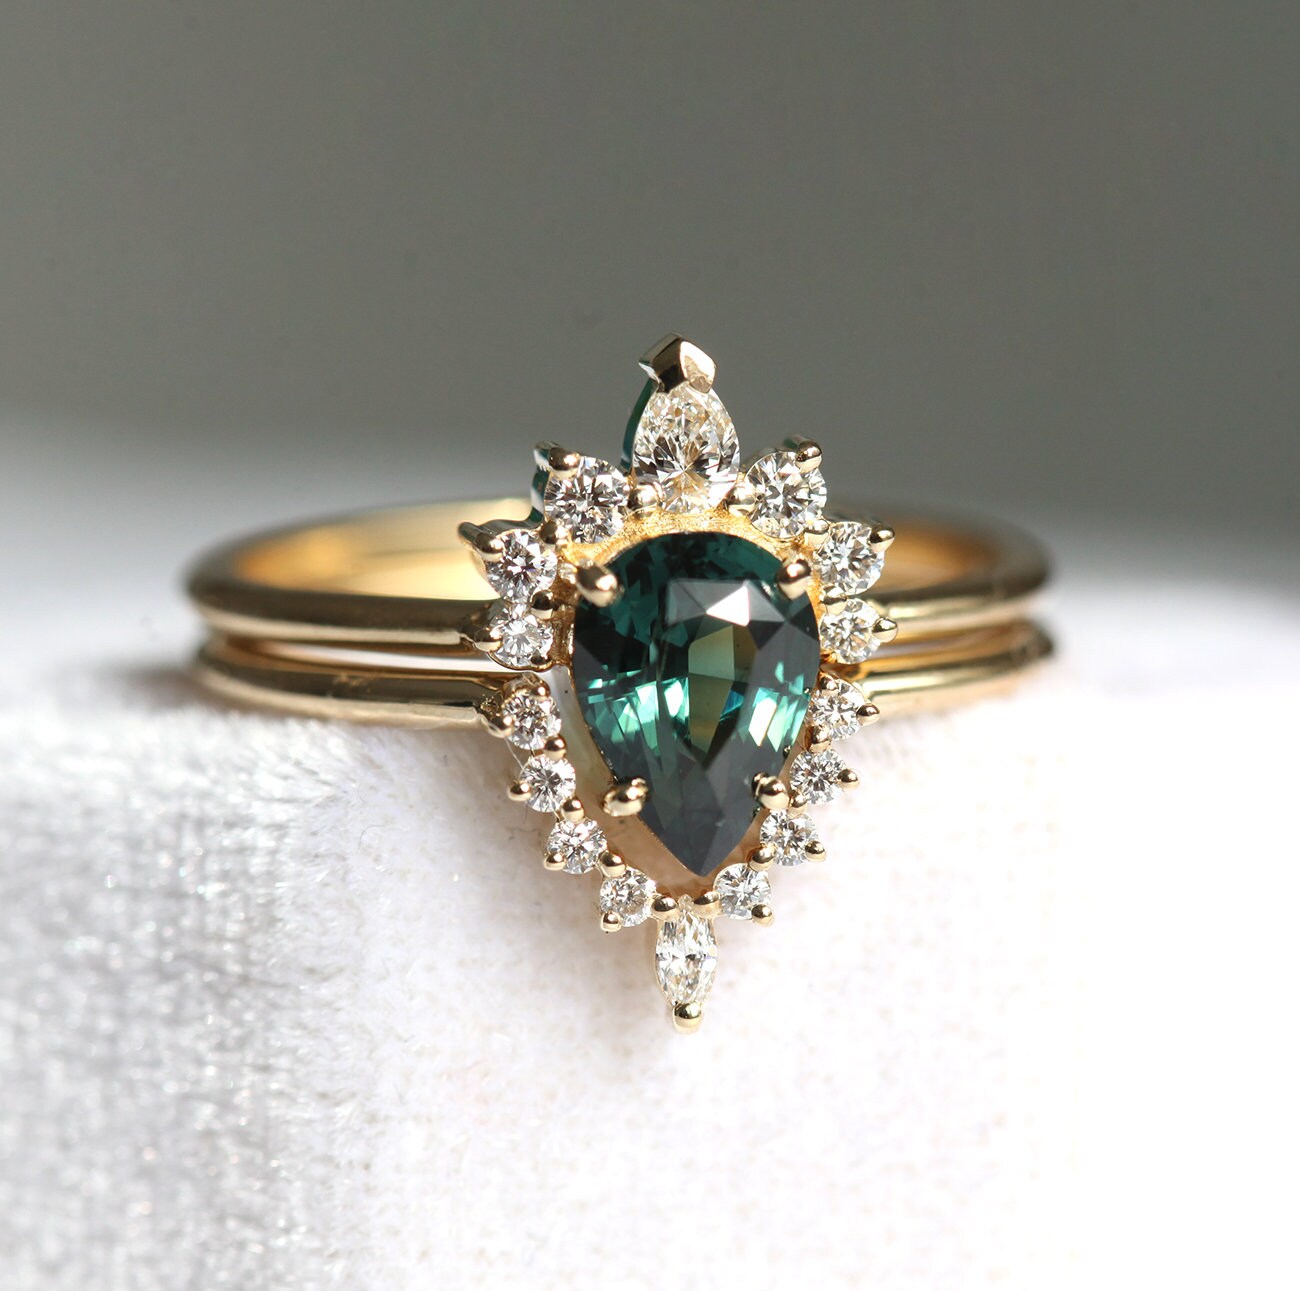 Pear-shaped teal sapphire ring with diamond halo